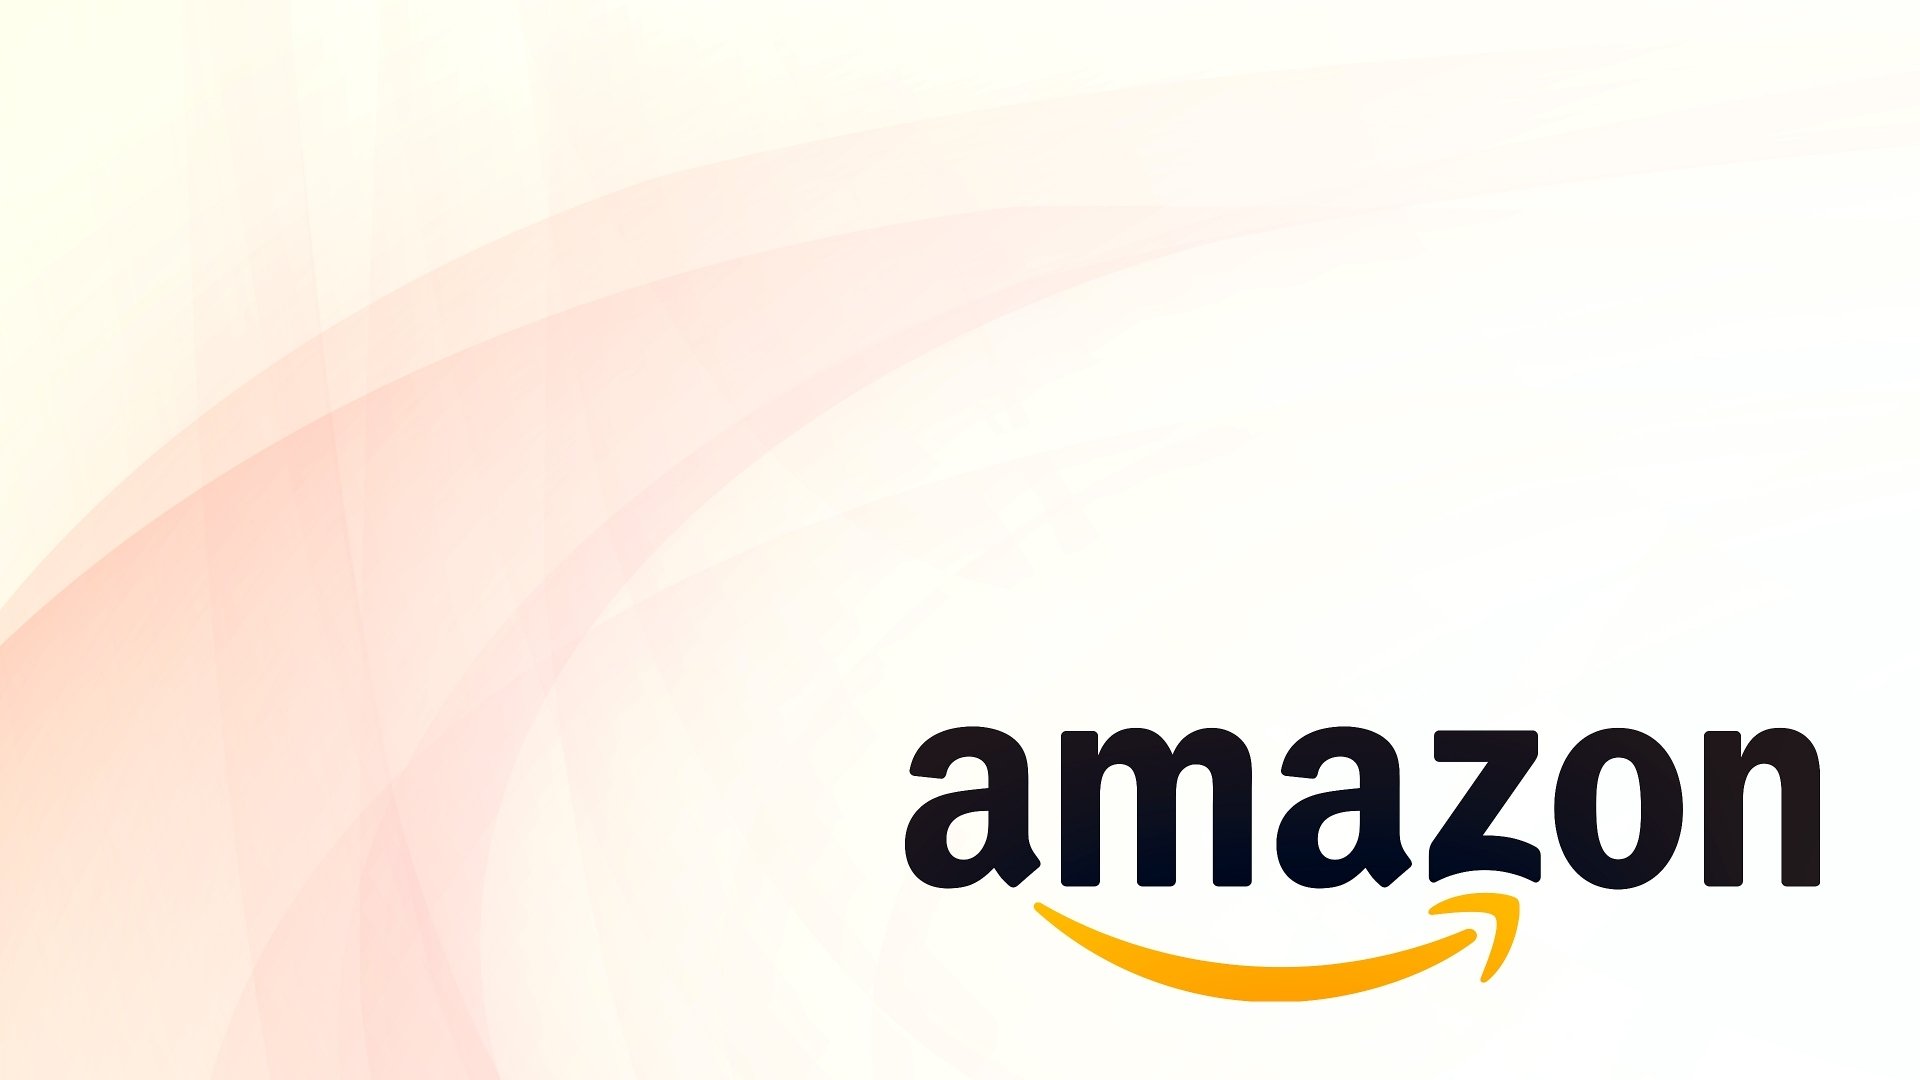 Amazon HD Wallpapers and Backgrounds